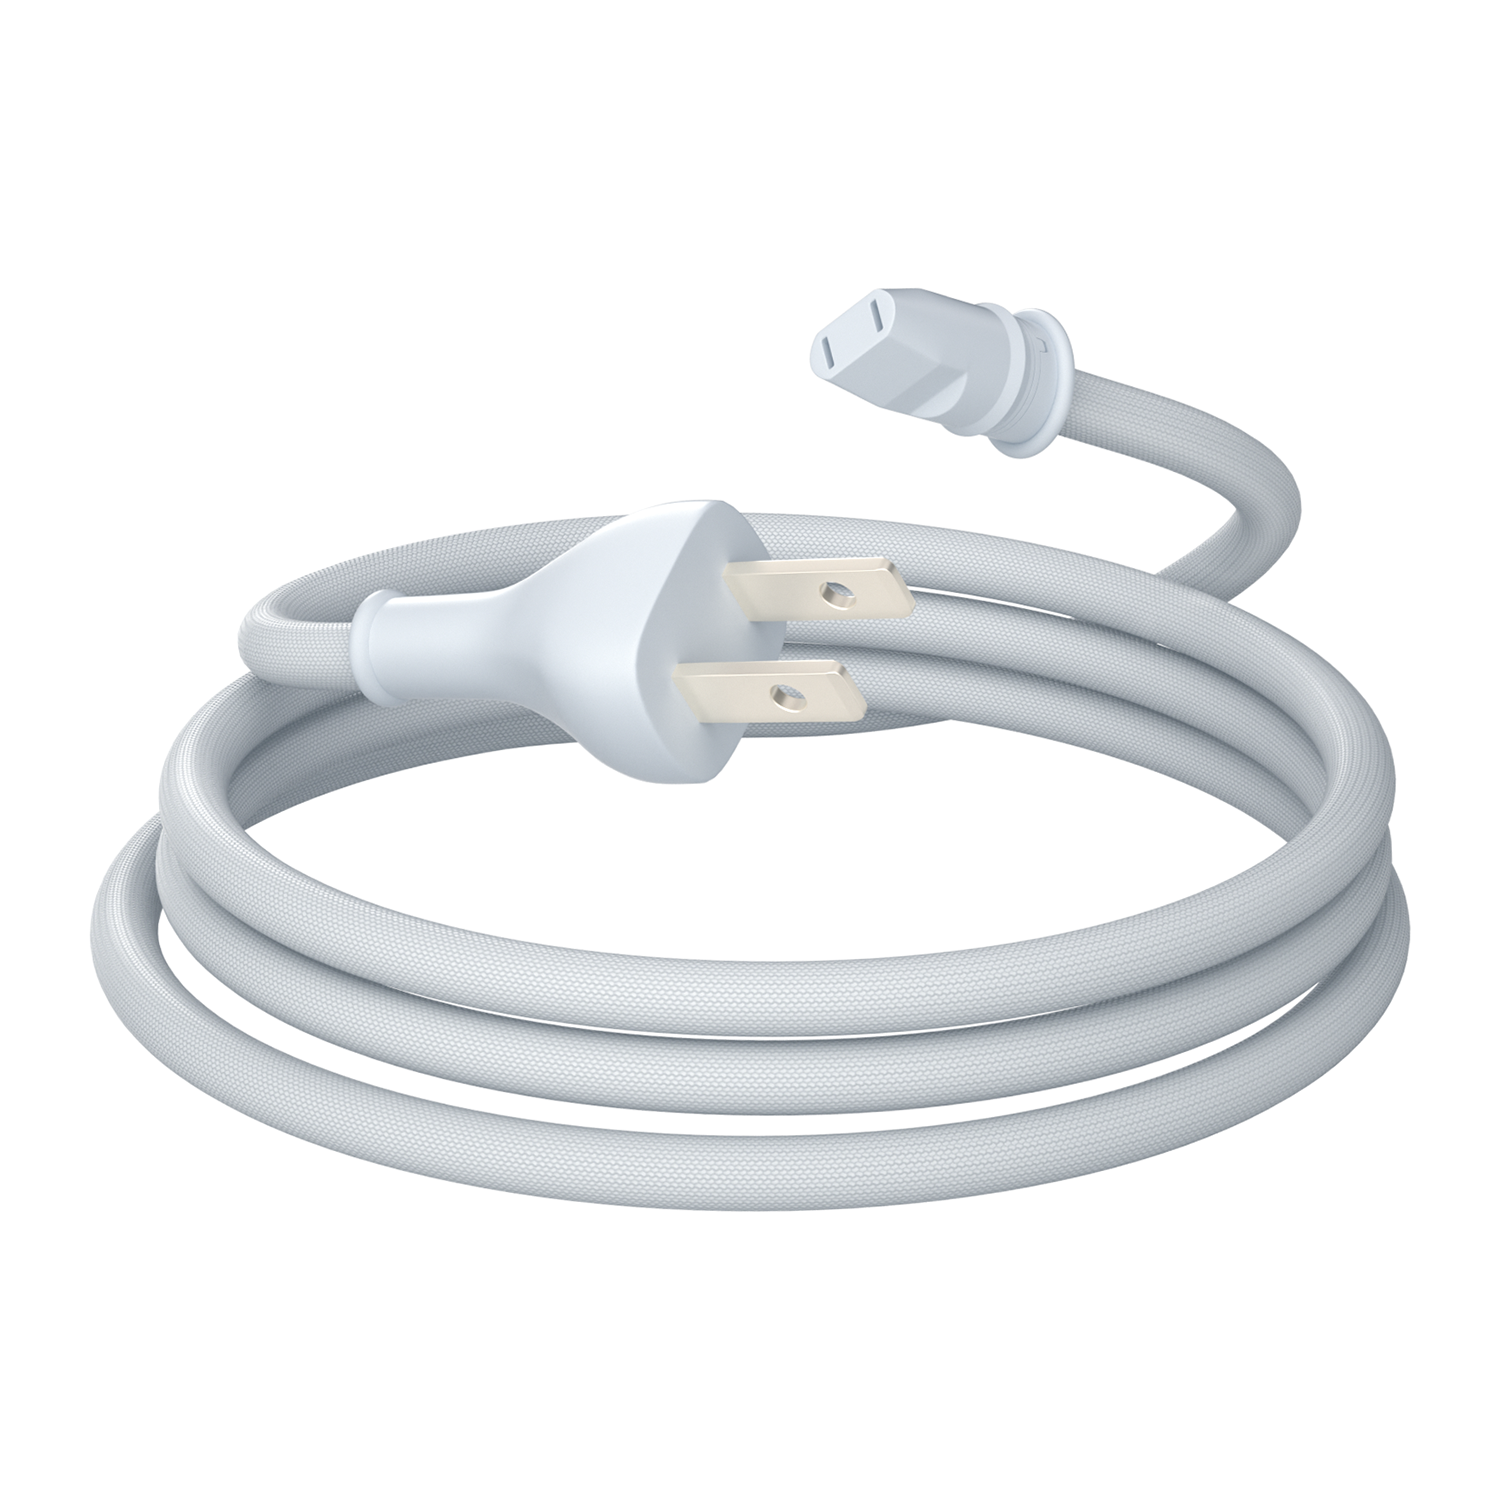 Genuine Apple A1639 HomePod Smart Speaker Power Cable Cord 6FT 622-00147 White Brand: Apple Model: 622-00147 Type: - Click Image to Close